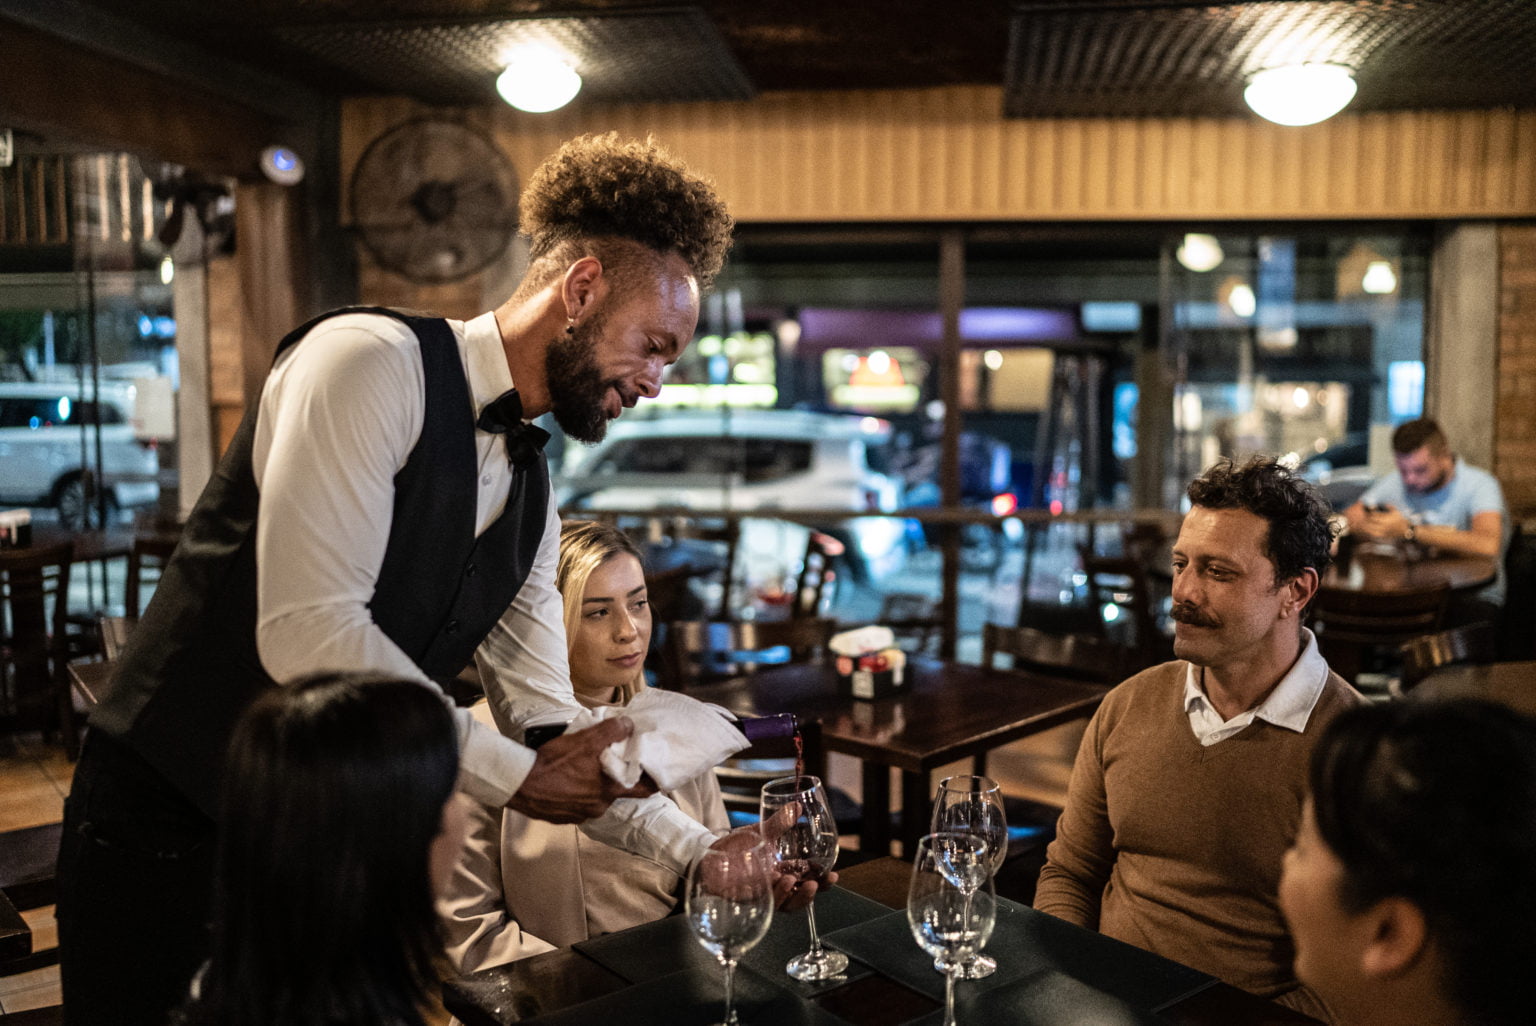 Waiter serving wine to customers at a bar